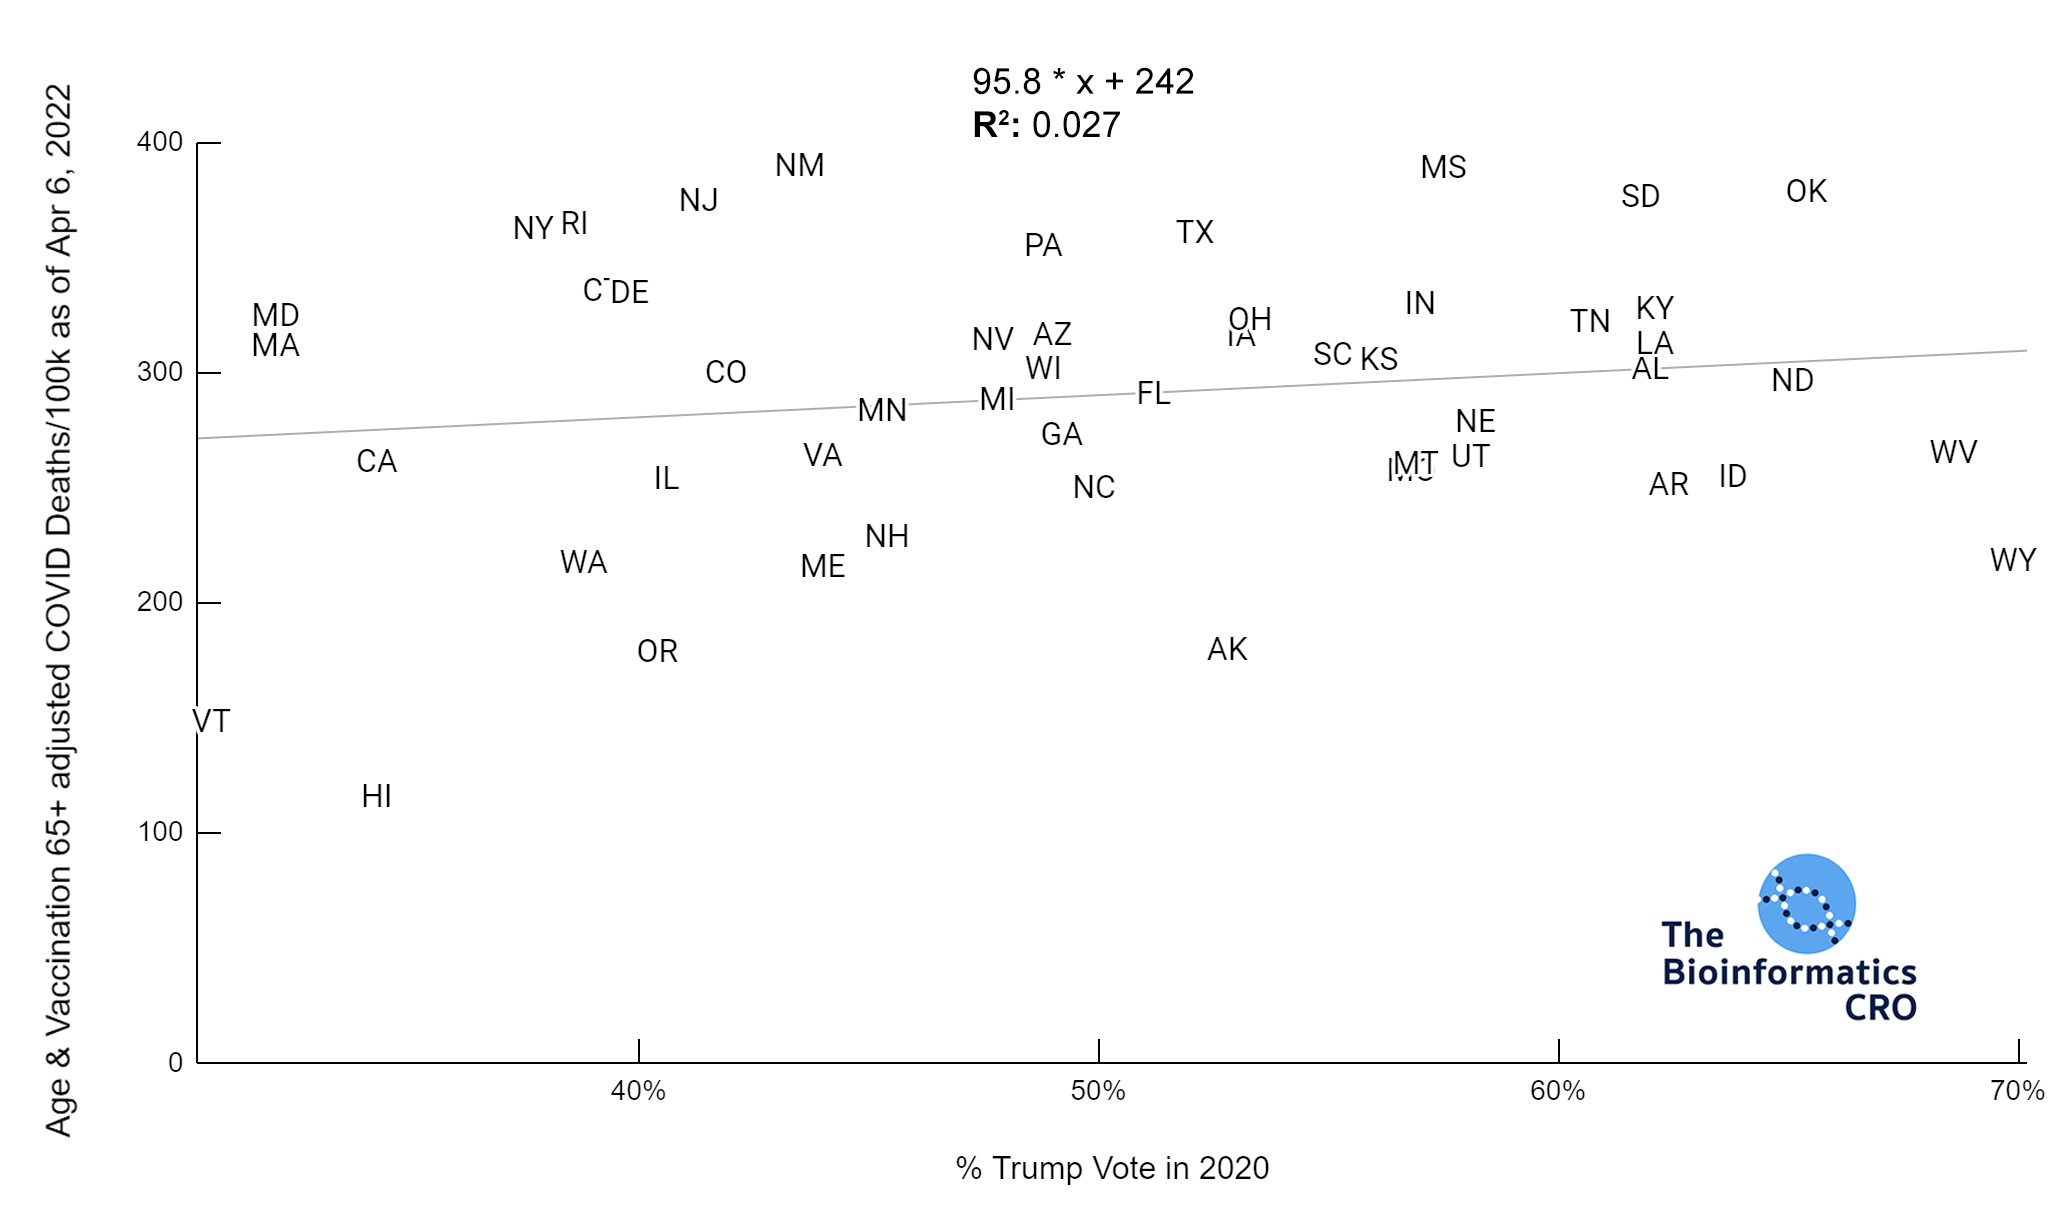 Age & Vaccinated Over 65 adjusted COVID Deaths versus Percent Trump Vote in 2020 | y = 95.8 * x + 242 | R^2 = 0.027